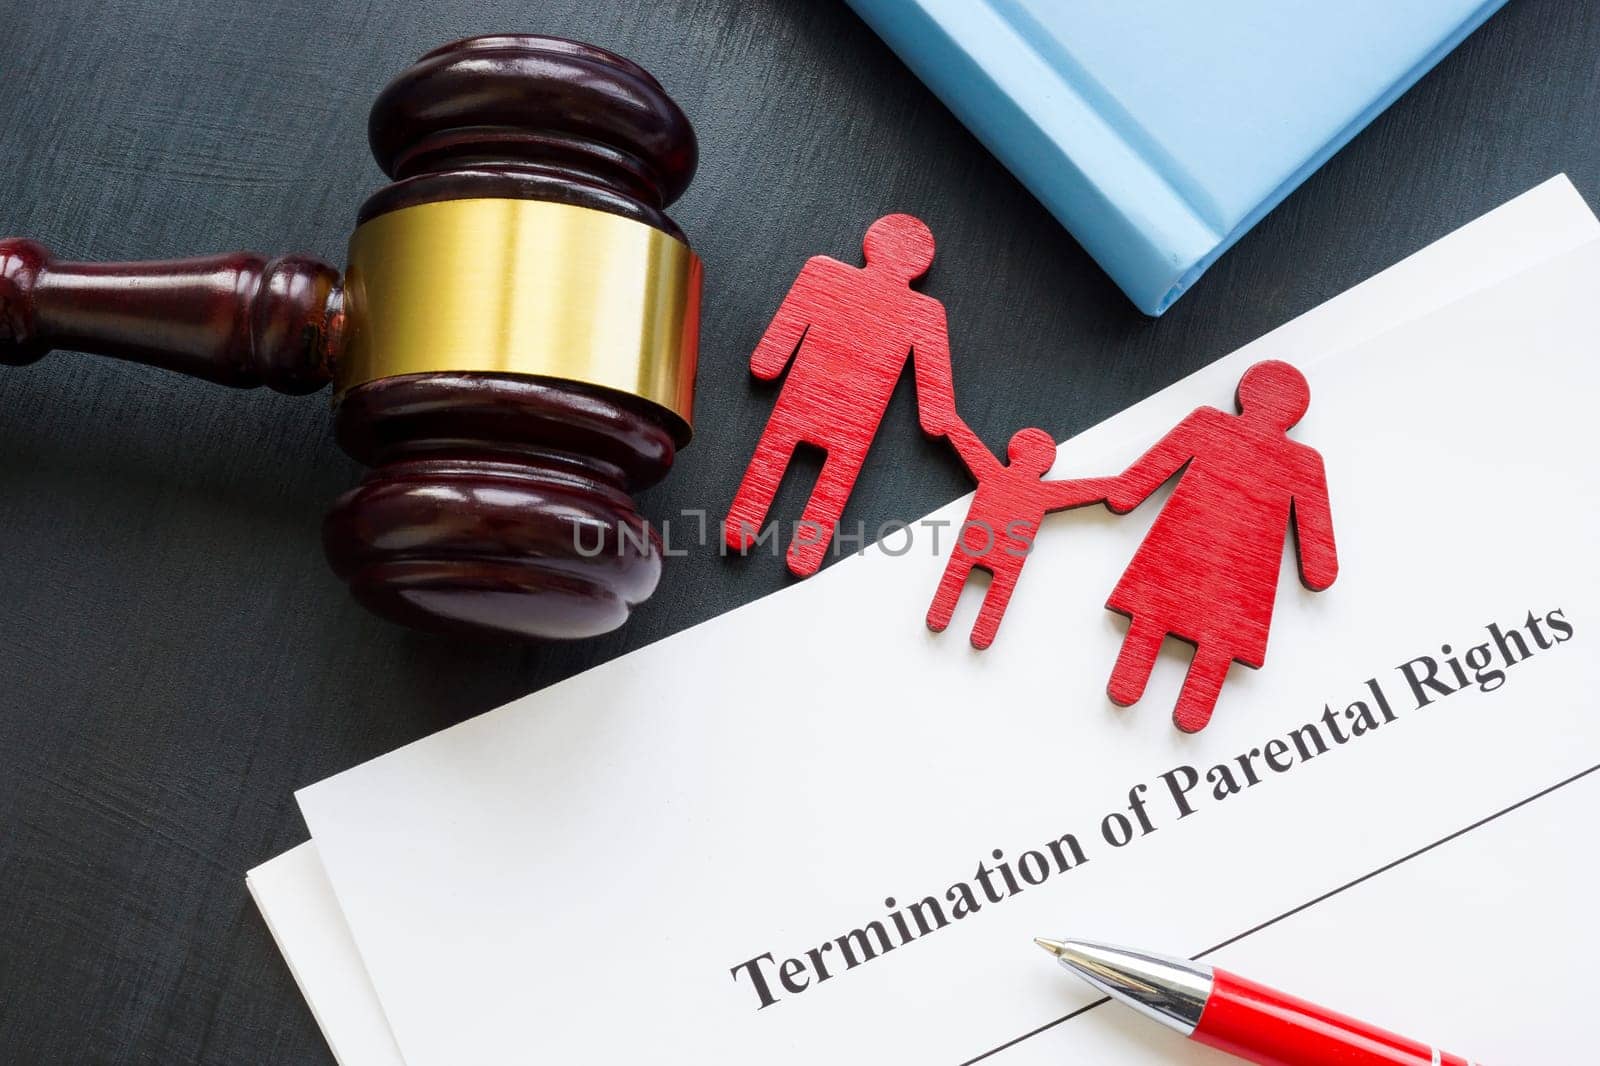 Documents about Termination of parental rights and family figurines. by designer491